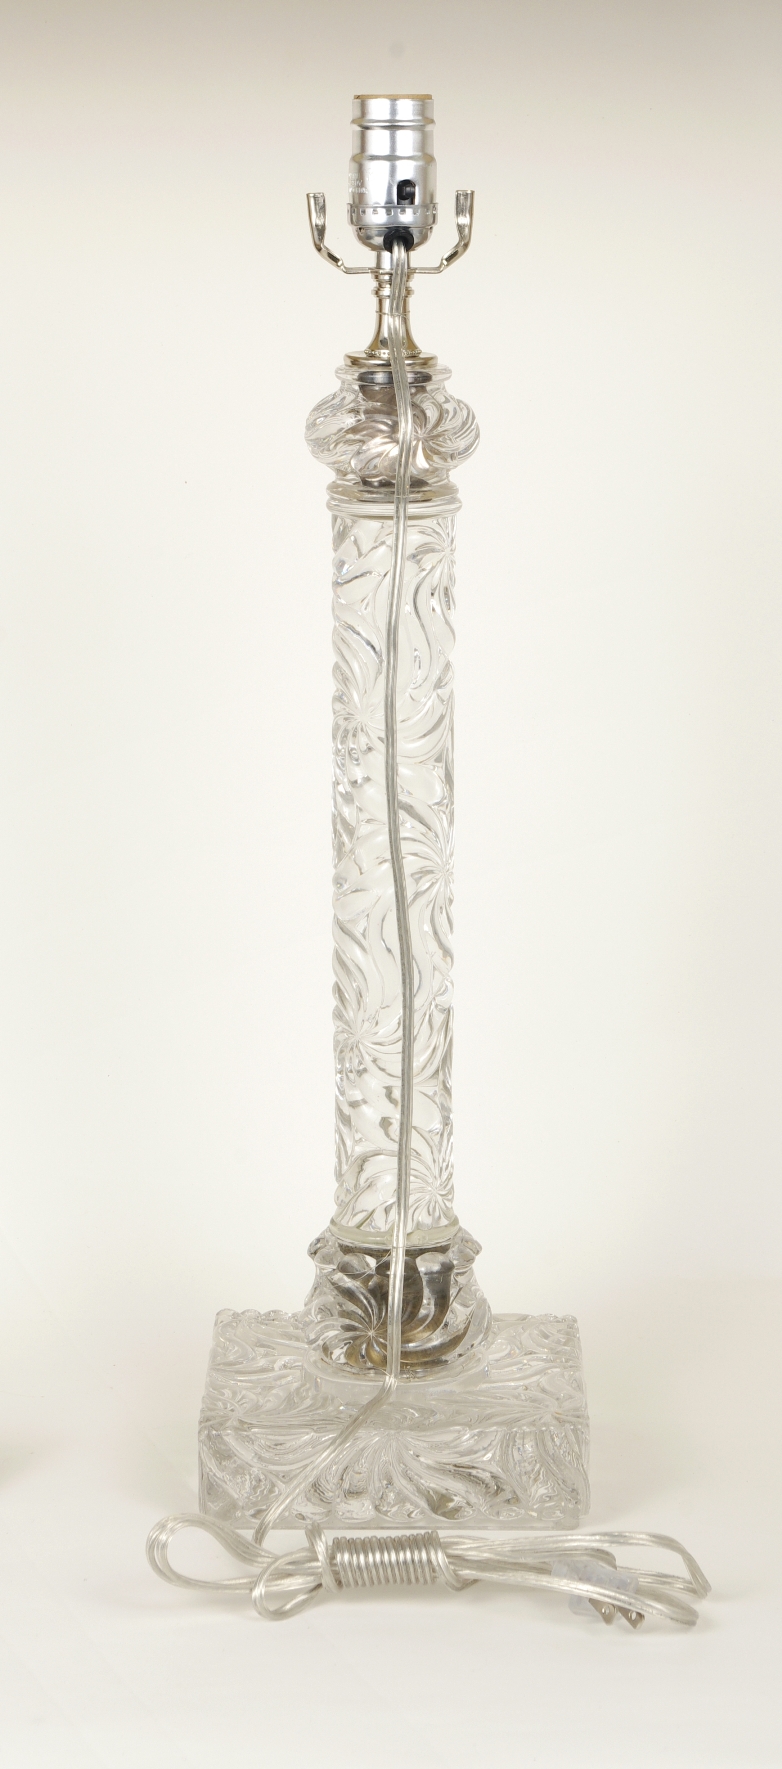 Signed Baccarat Crystal Lamp, c. 1880